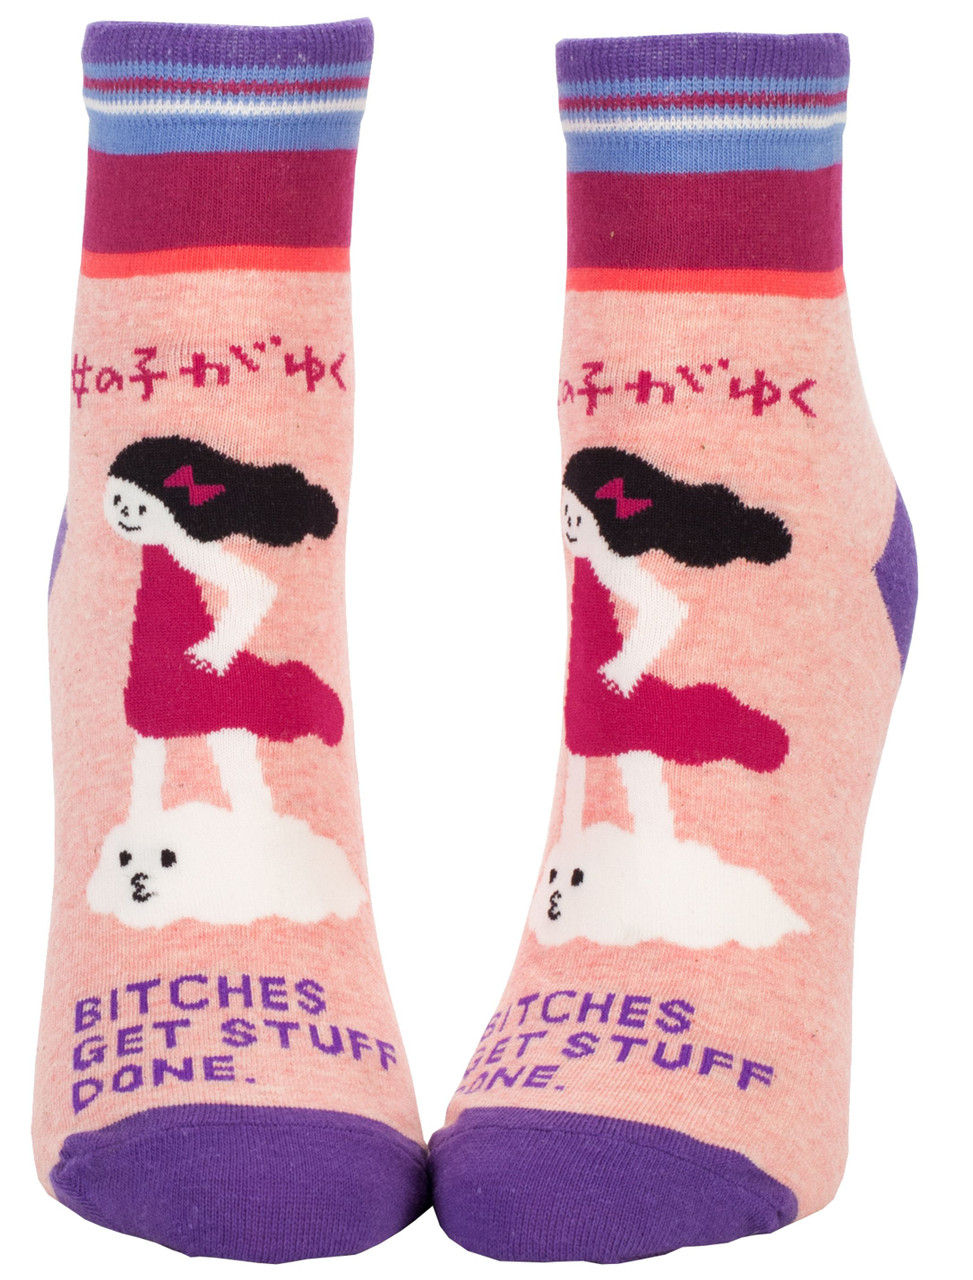 Bitches Get Stuff Done - Women's Ankle Socks